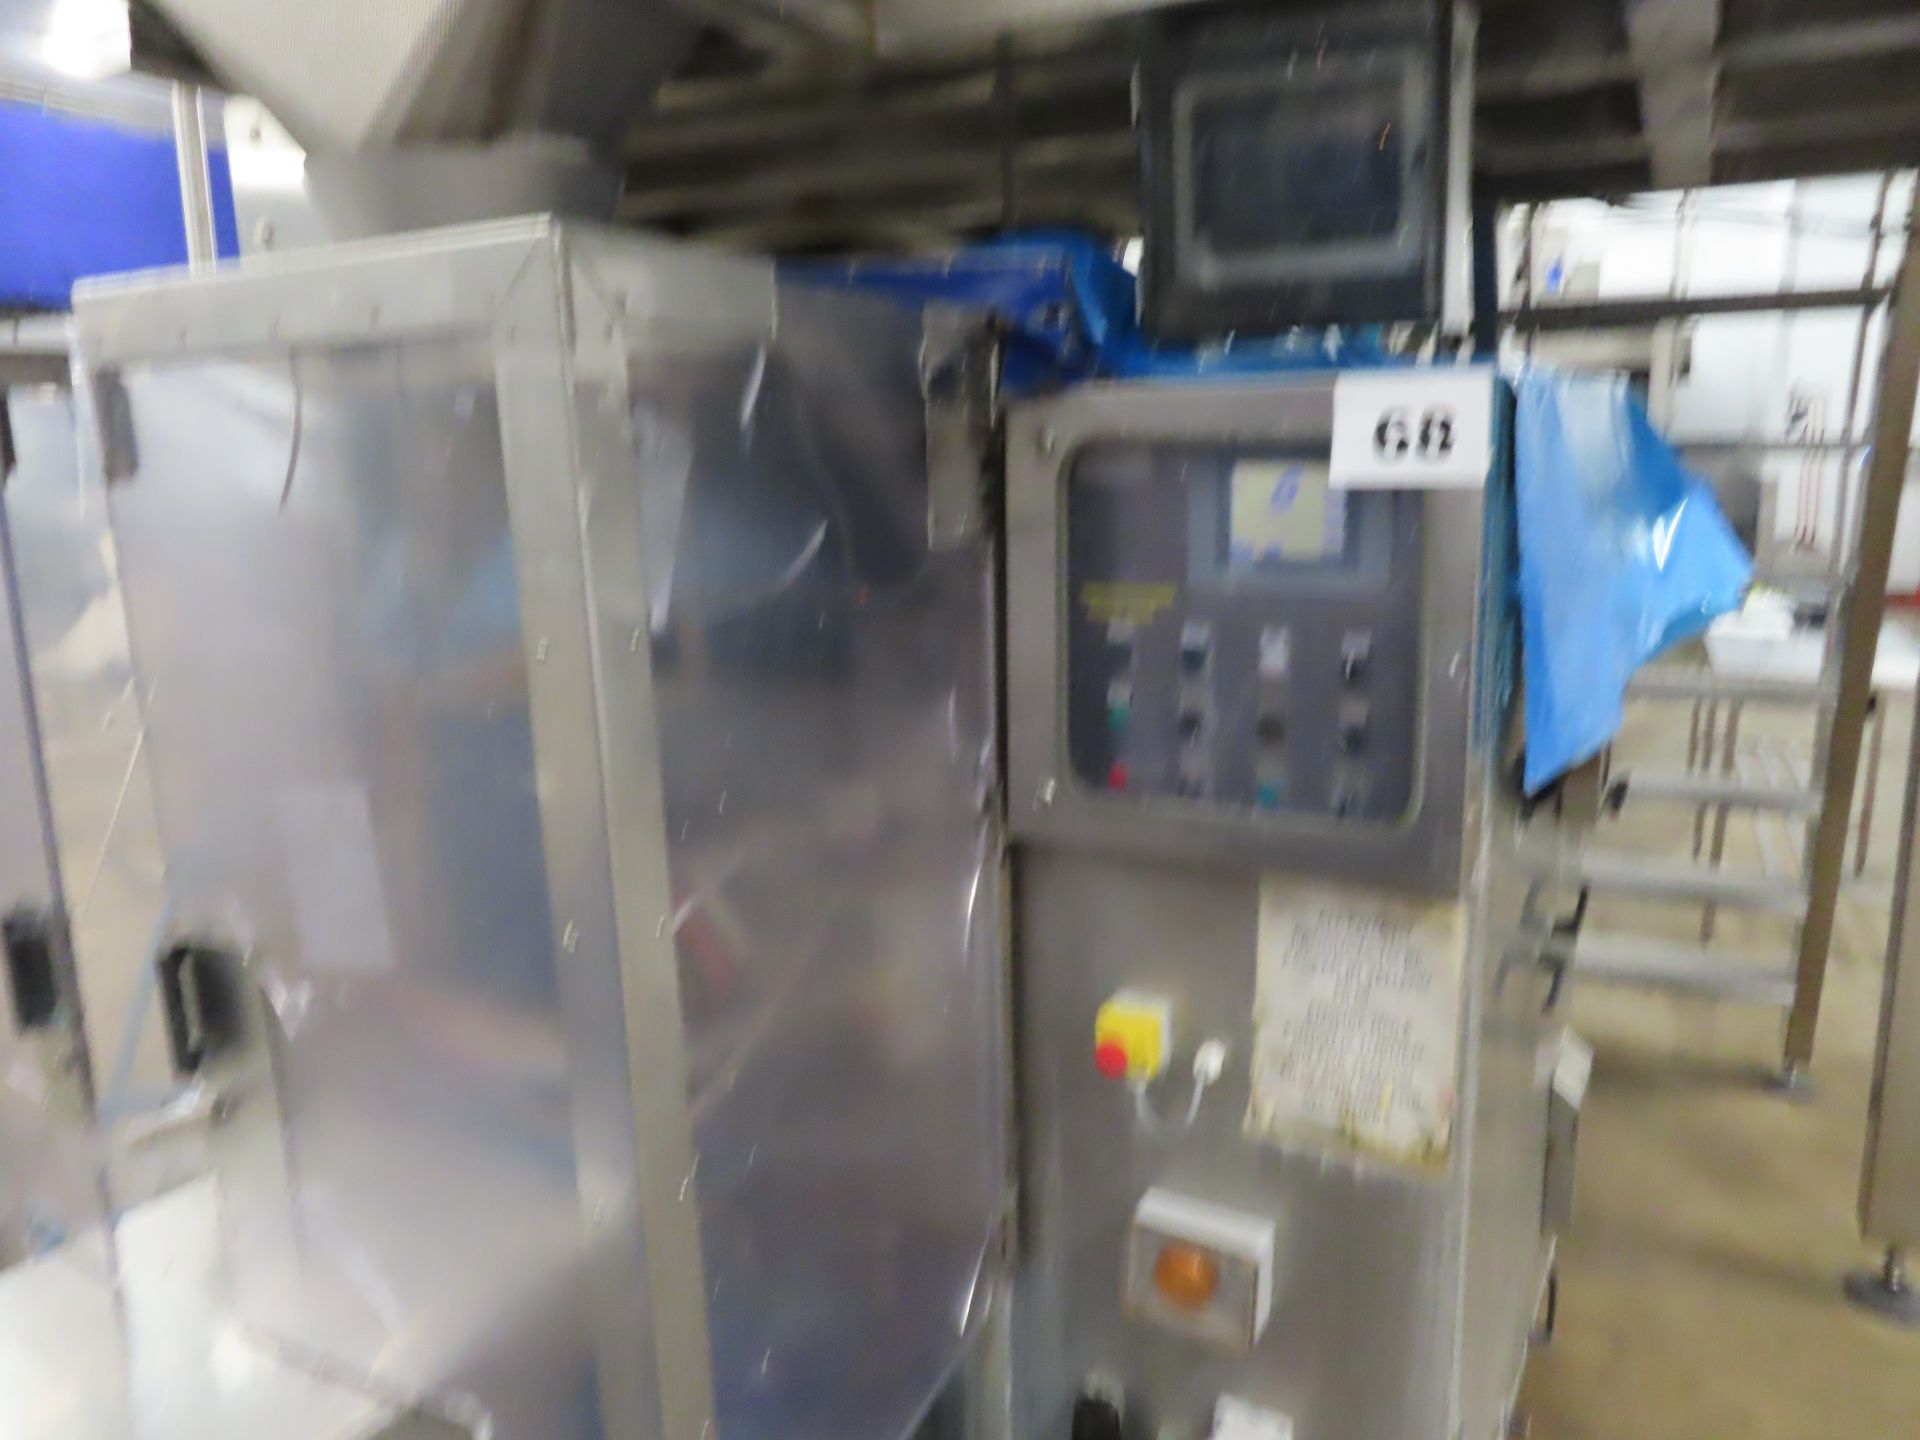 SABELPACK LION VERTICAL FORM FILL AND SEAL MACHINE. - Image 4 of 4